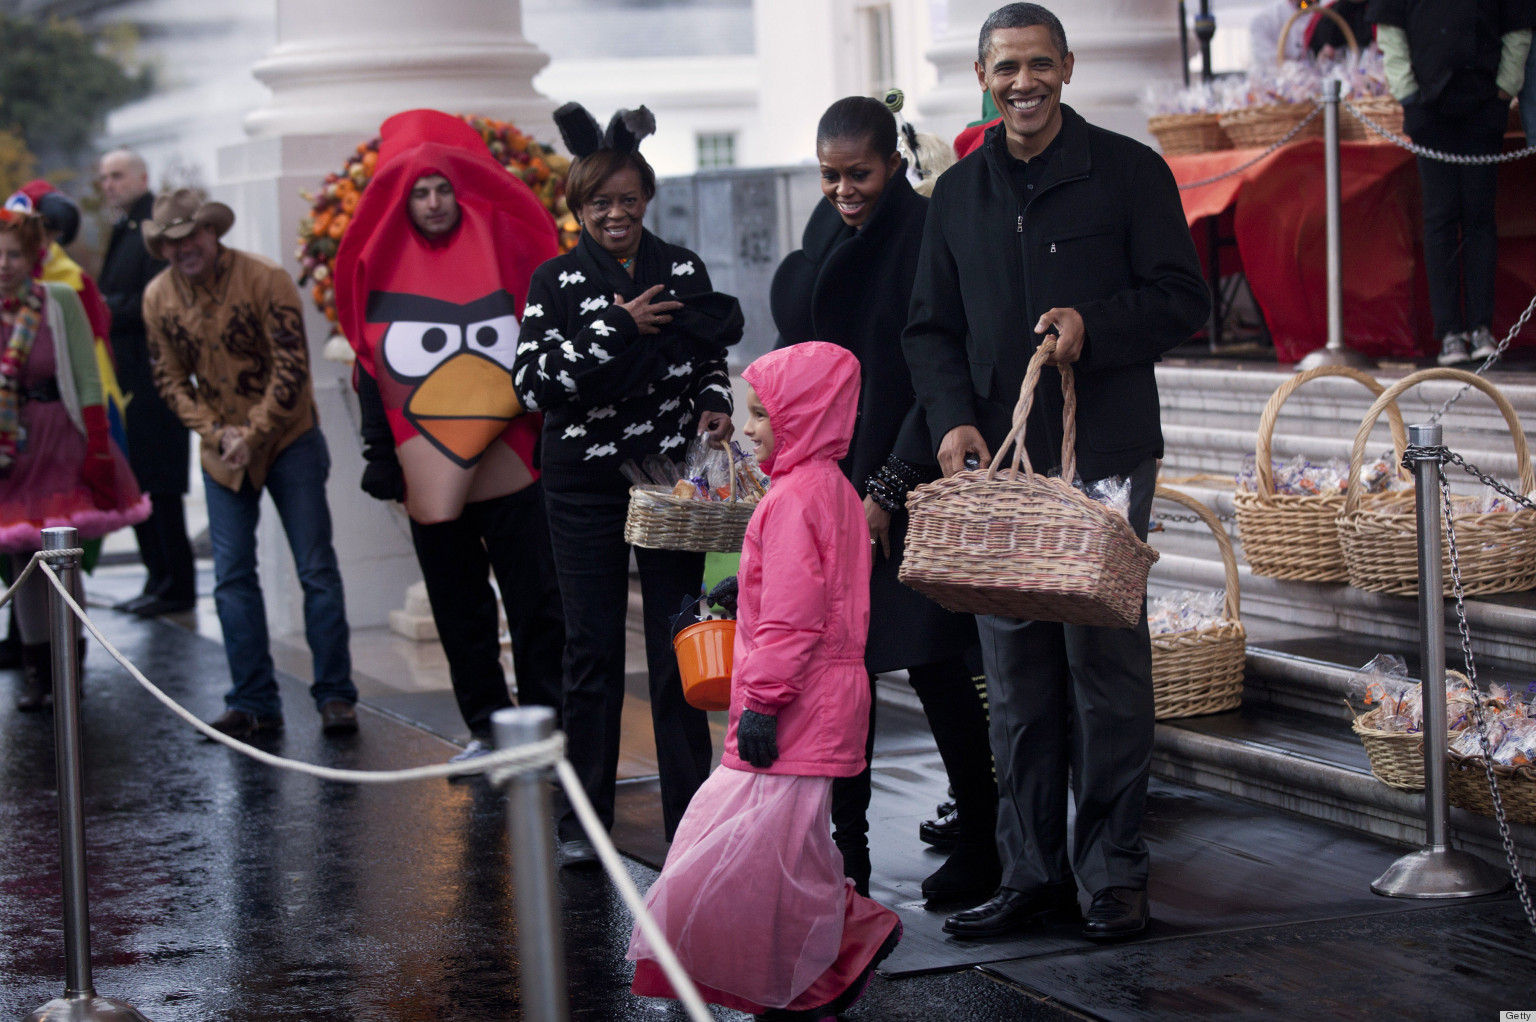 Halloween At The White House: Costumes, Candy & Puppies! (PHOTOS)1536 x 1022